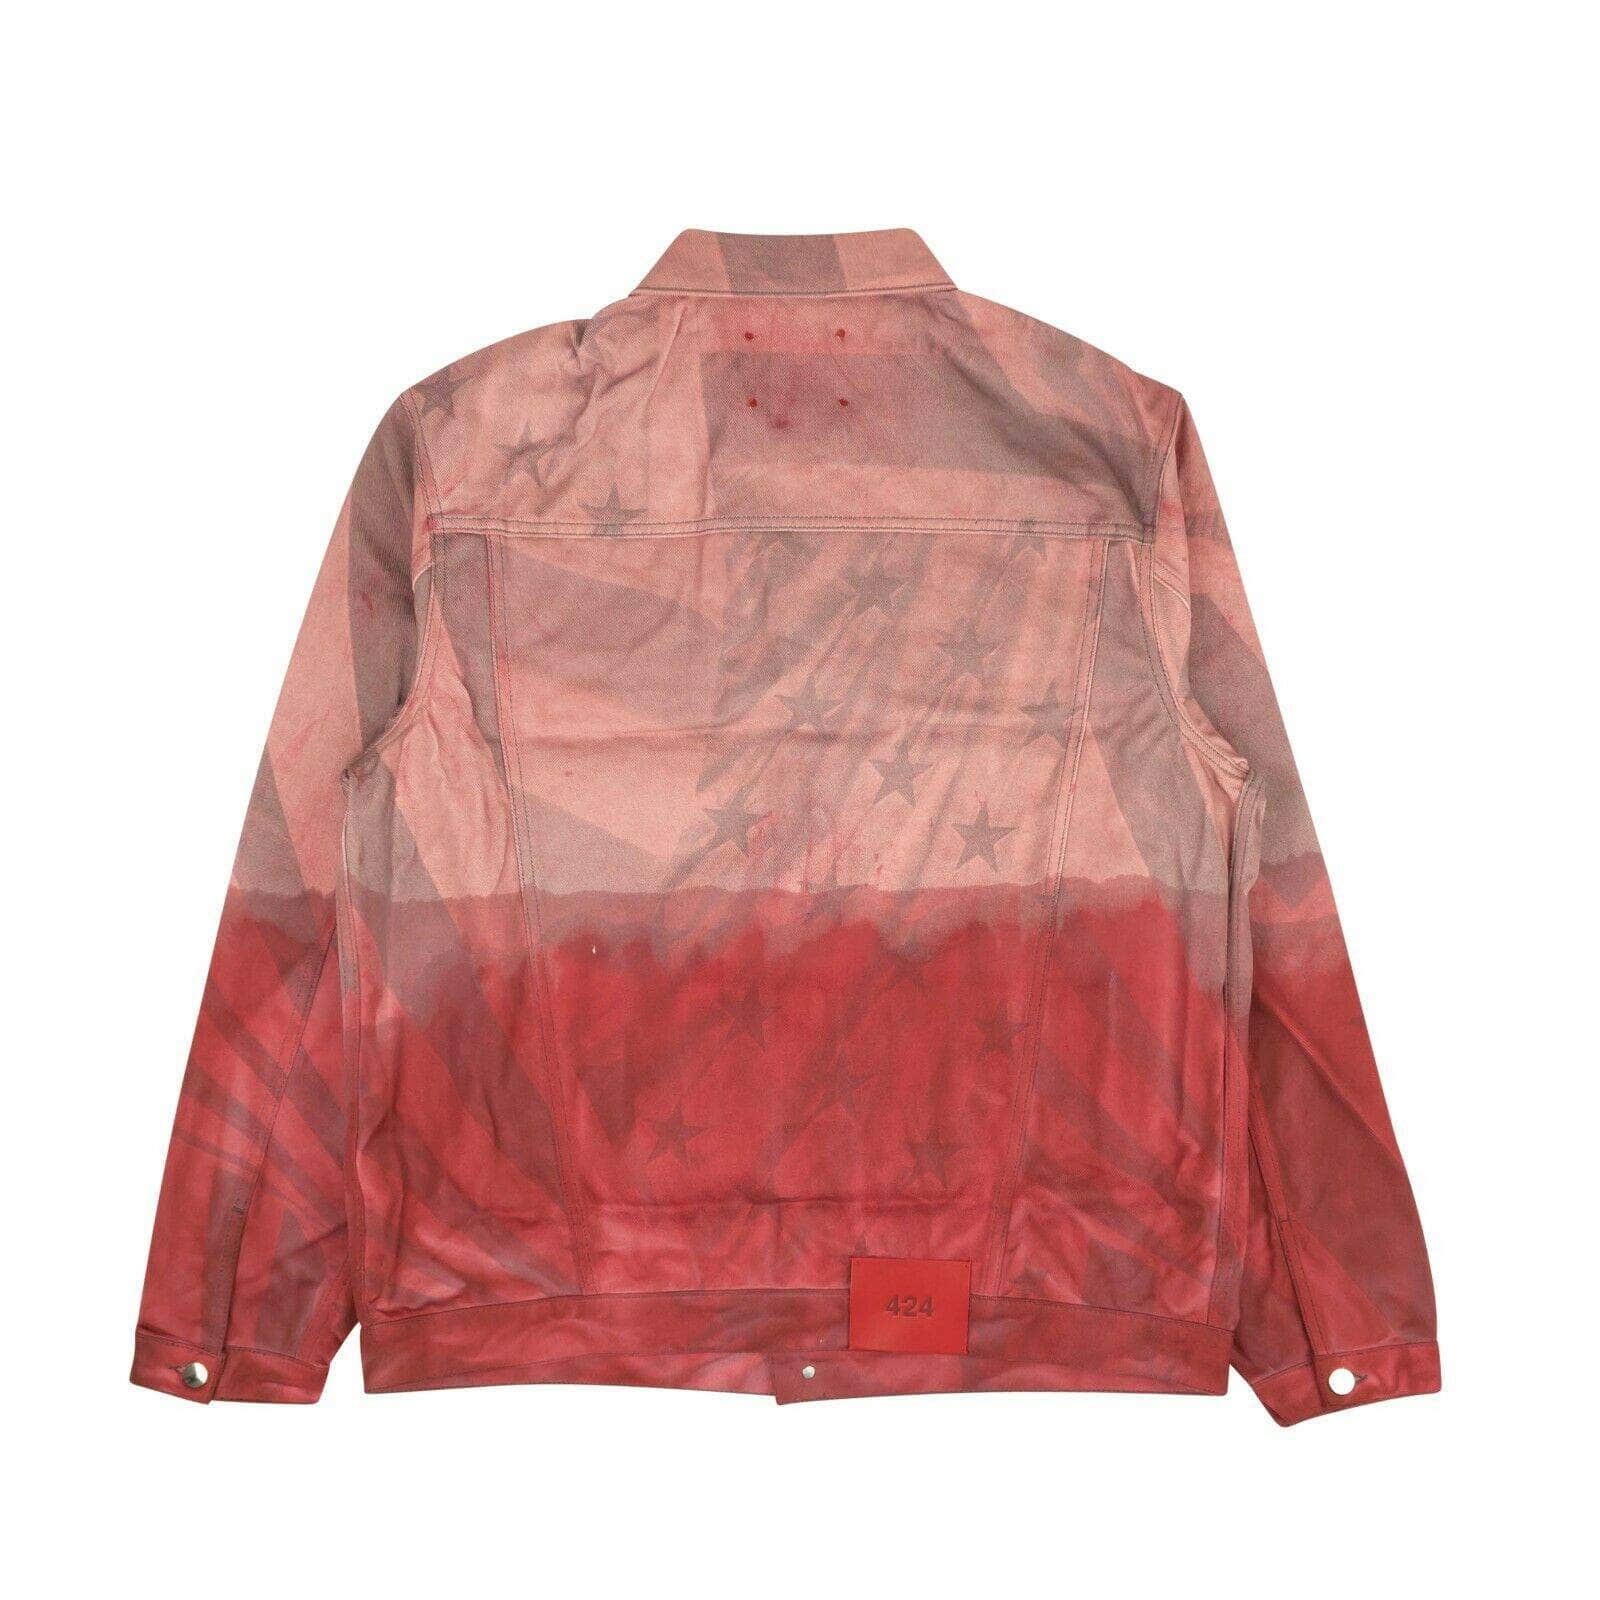 424 ON FAIRFAX 424-on-fairfax, 500-750, channelenable-all, chicmi, couponcollection, gender-mens, main-clothing, mens-shoes, size-l, size-m, size-s, size-xl, size-xs, size-xxl Pink Pigment Dip American Flag Denim Jacket